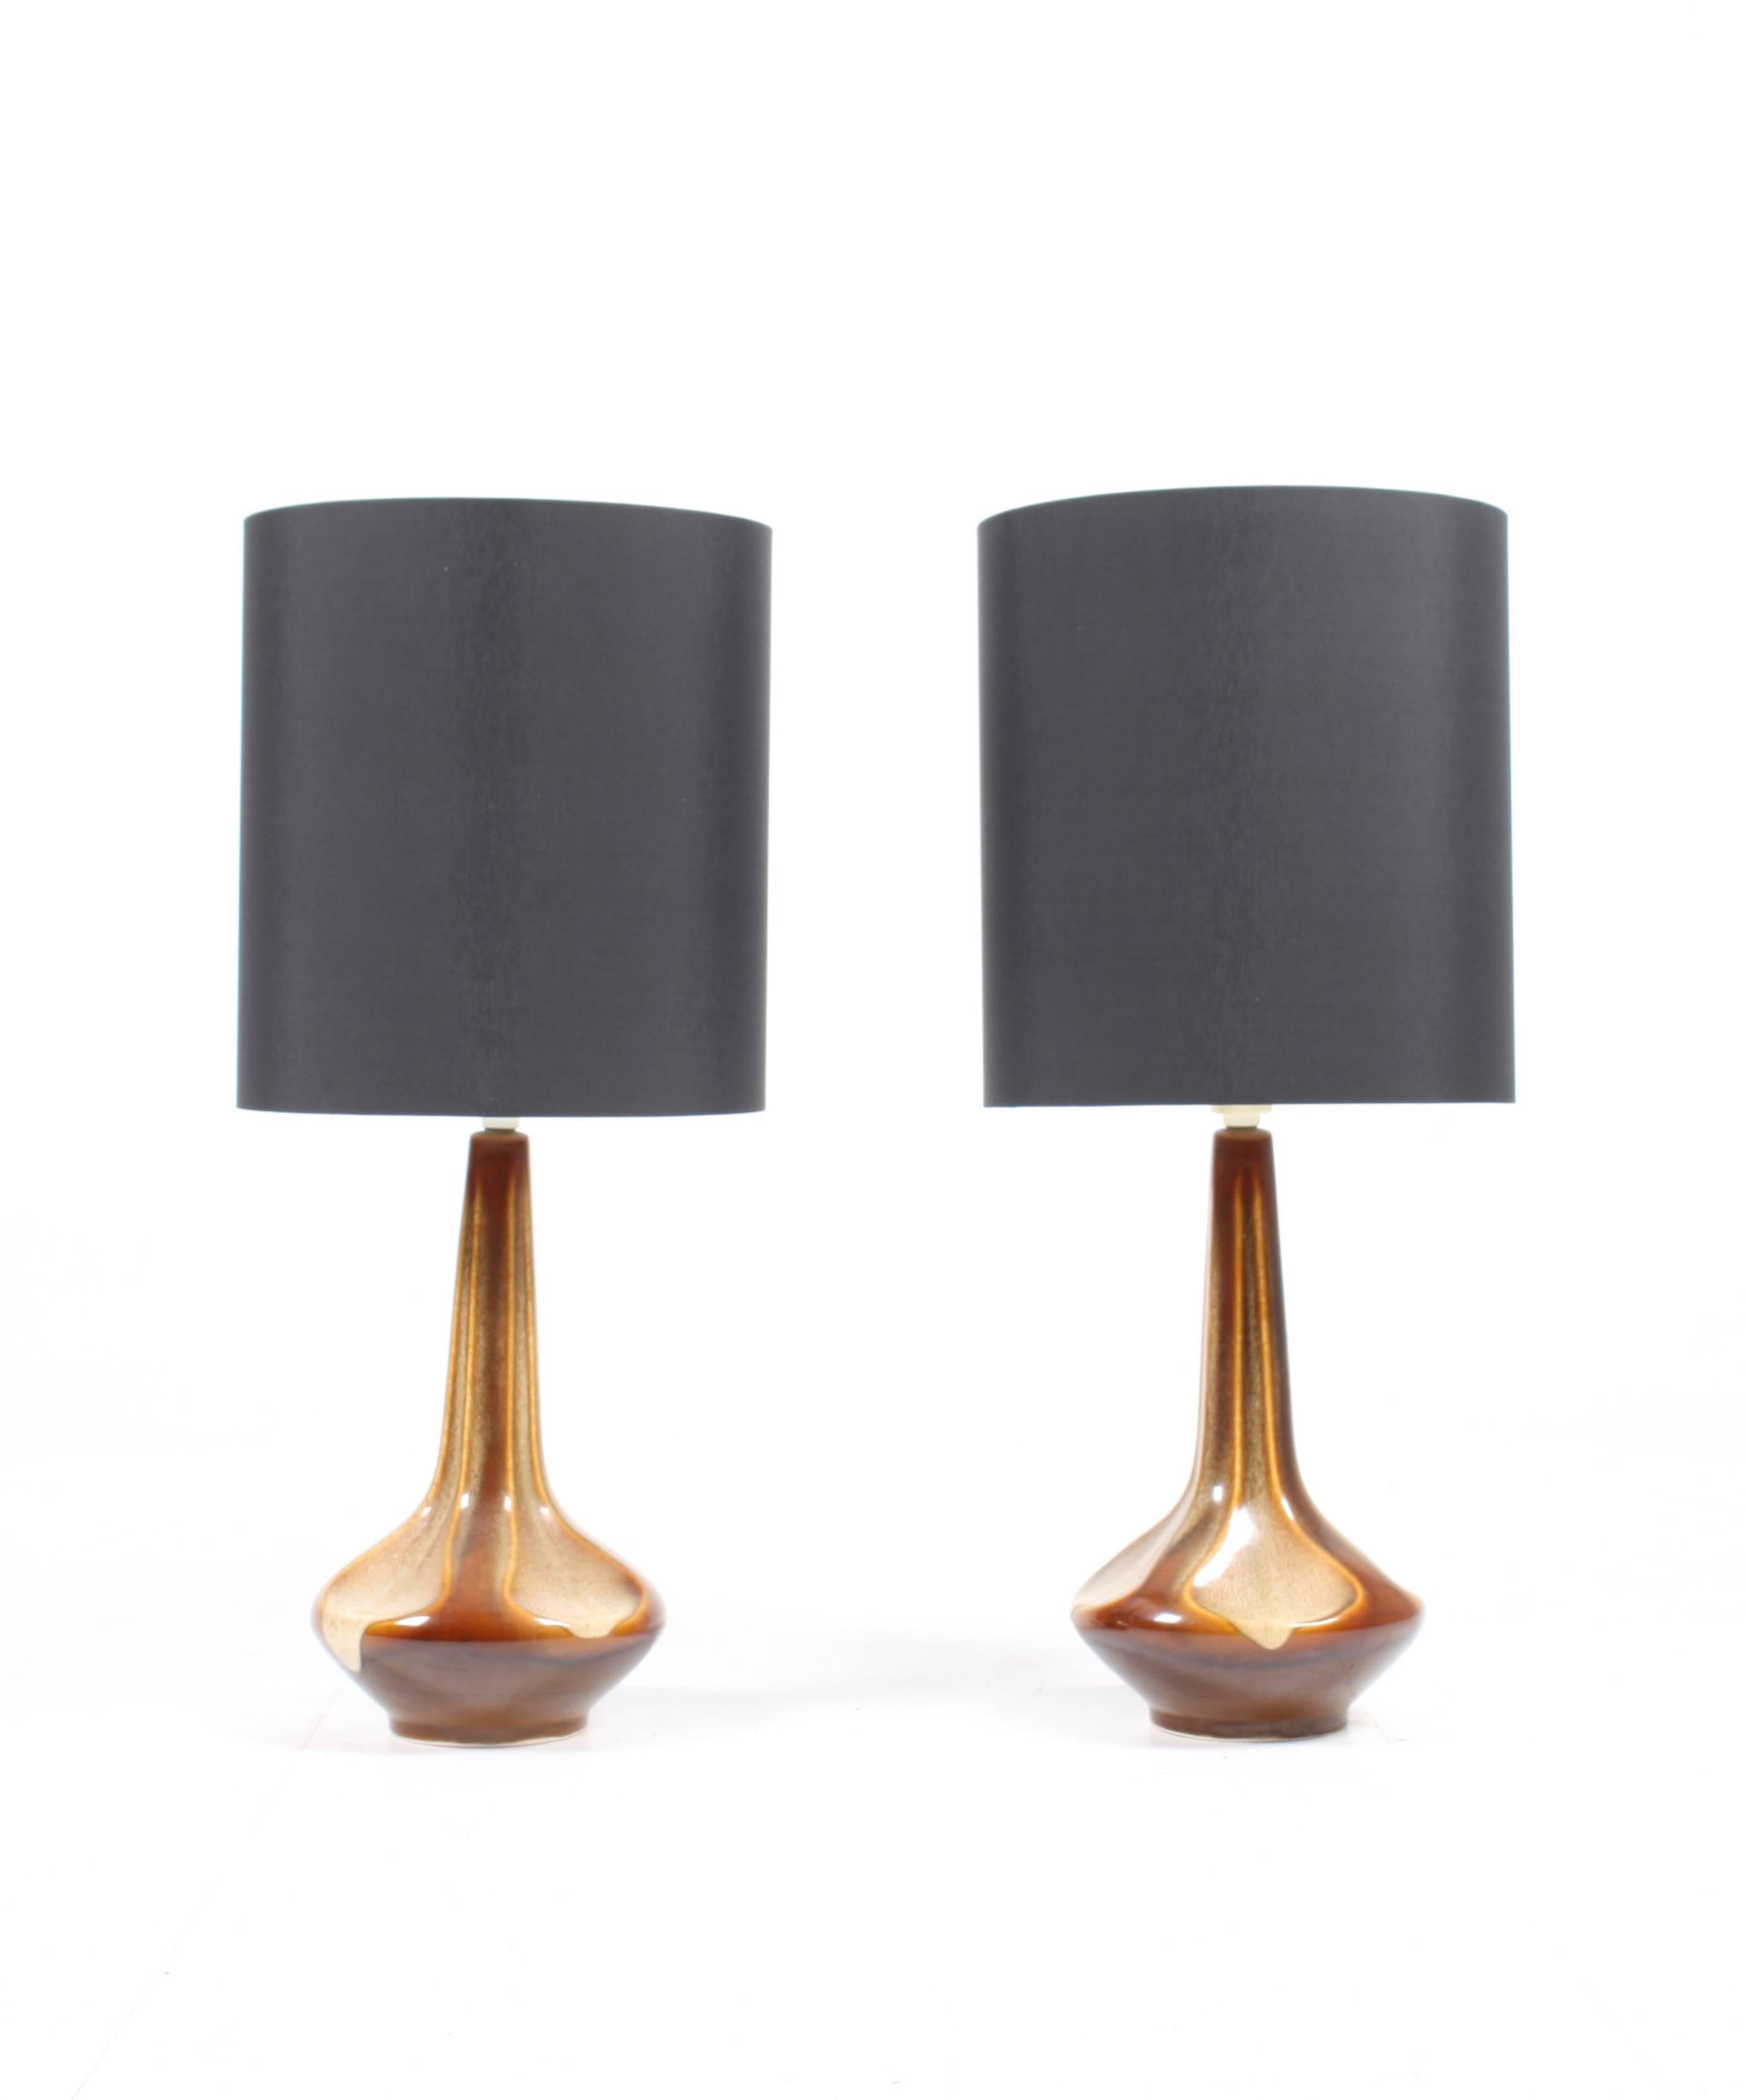 Pair of Danish table lamps designed by Søholm Studio in the mid-1960s. This lamp is a fine example of the Danish ceramics made on the island Bornholm. Great condition.